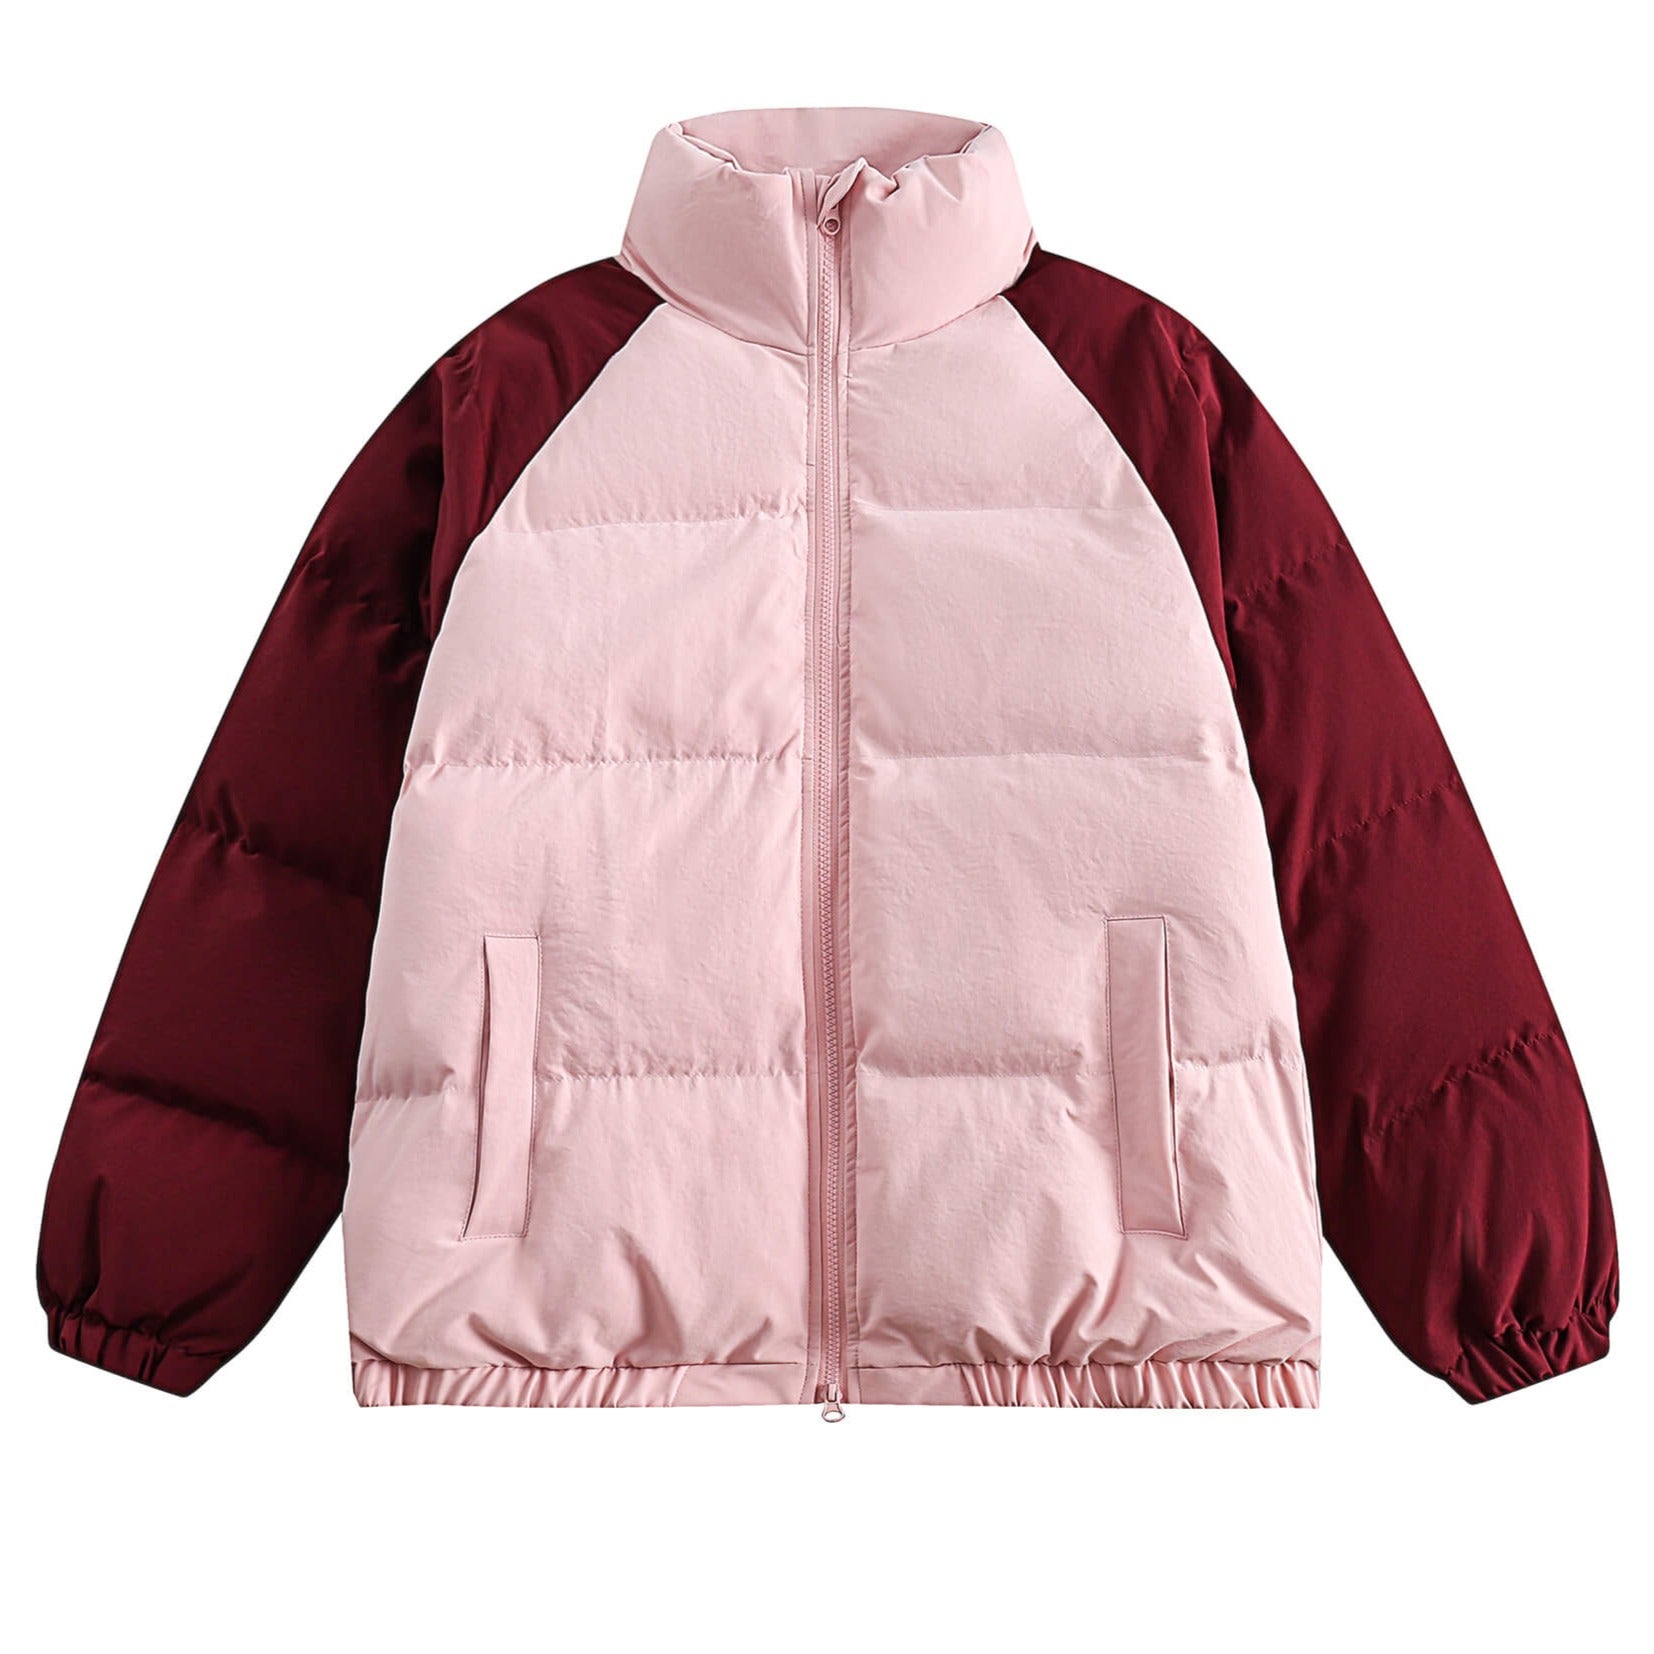 Double Color E-Girl Aesthetic Winter Puffer Jacket